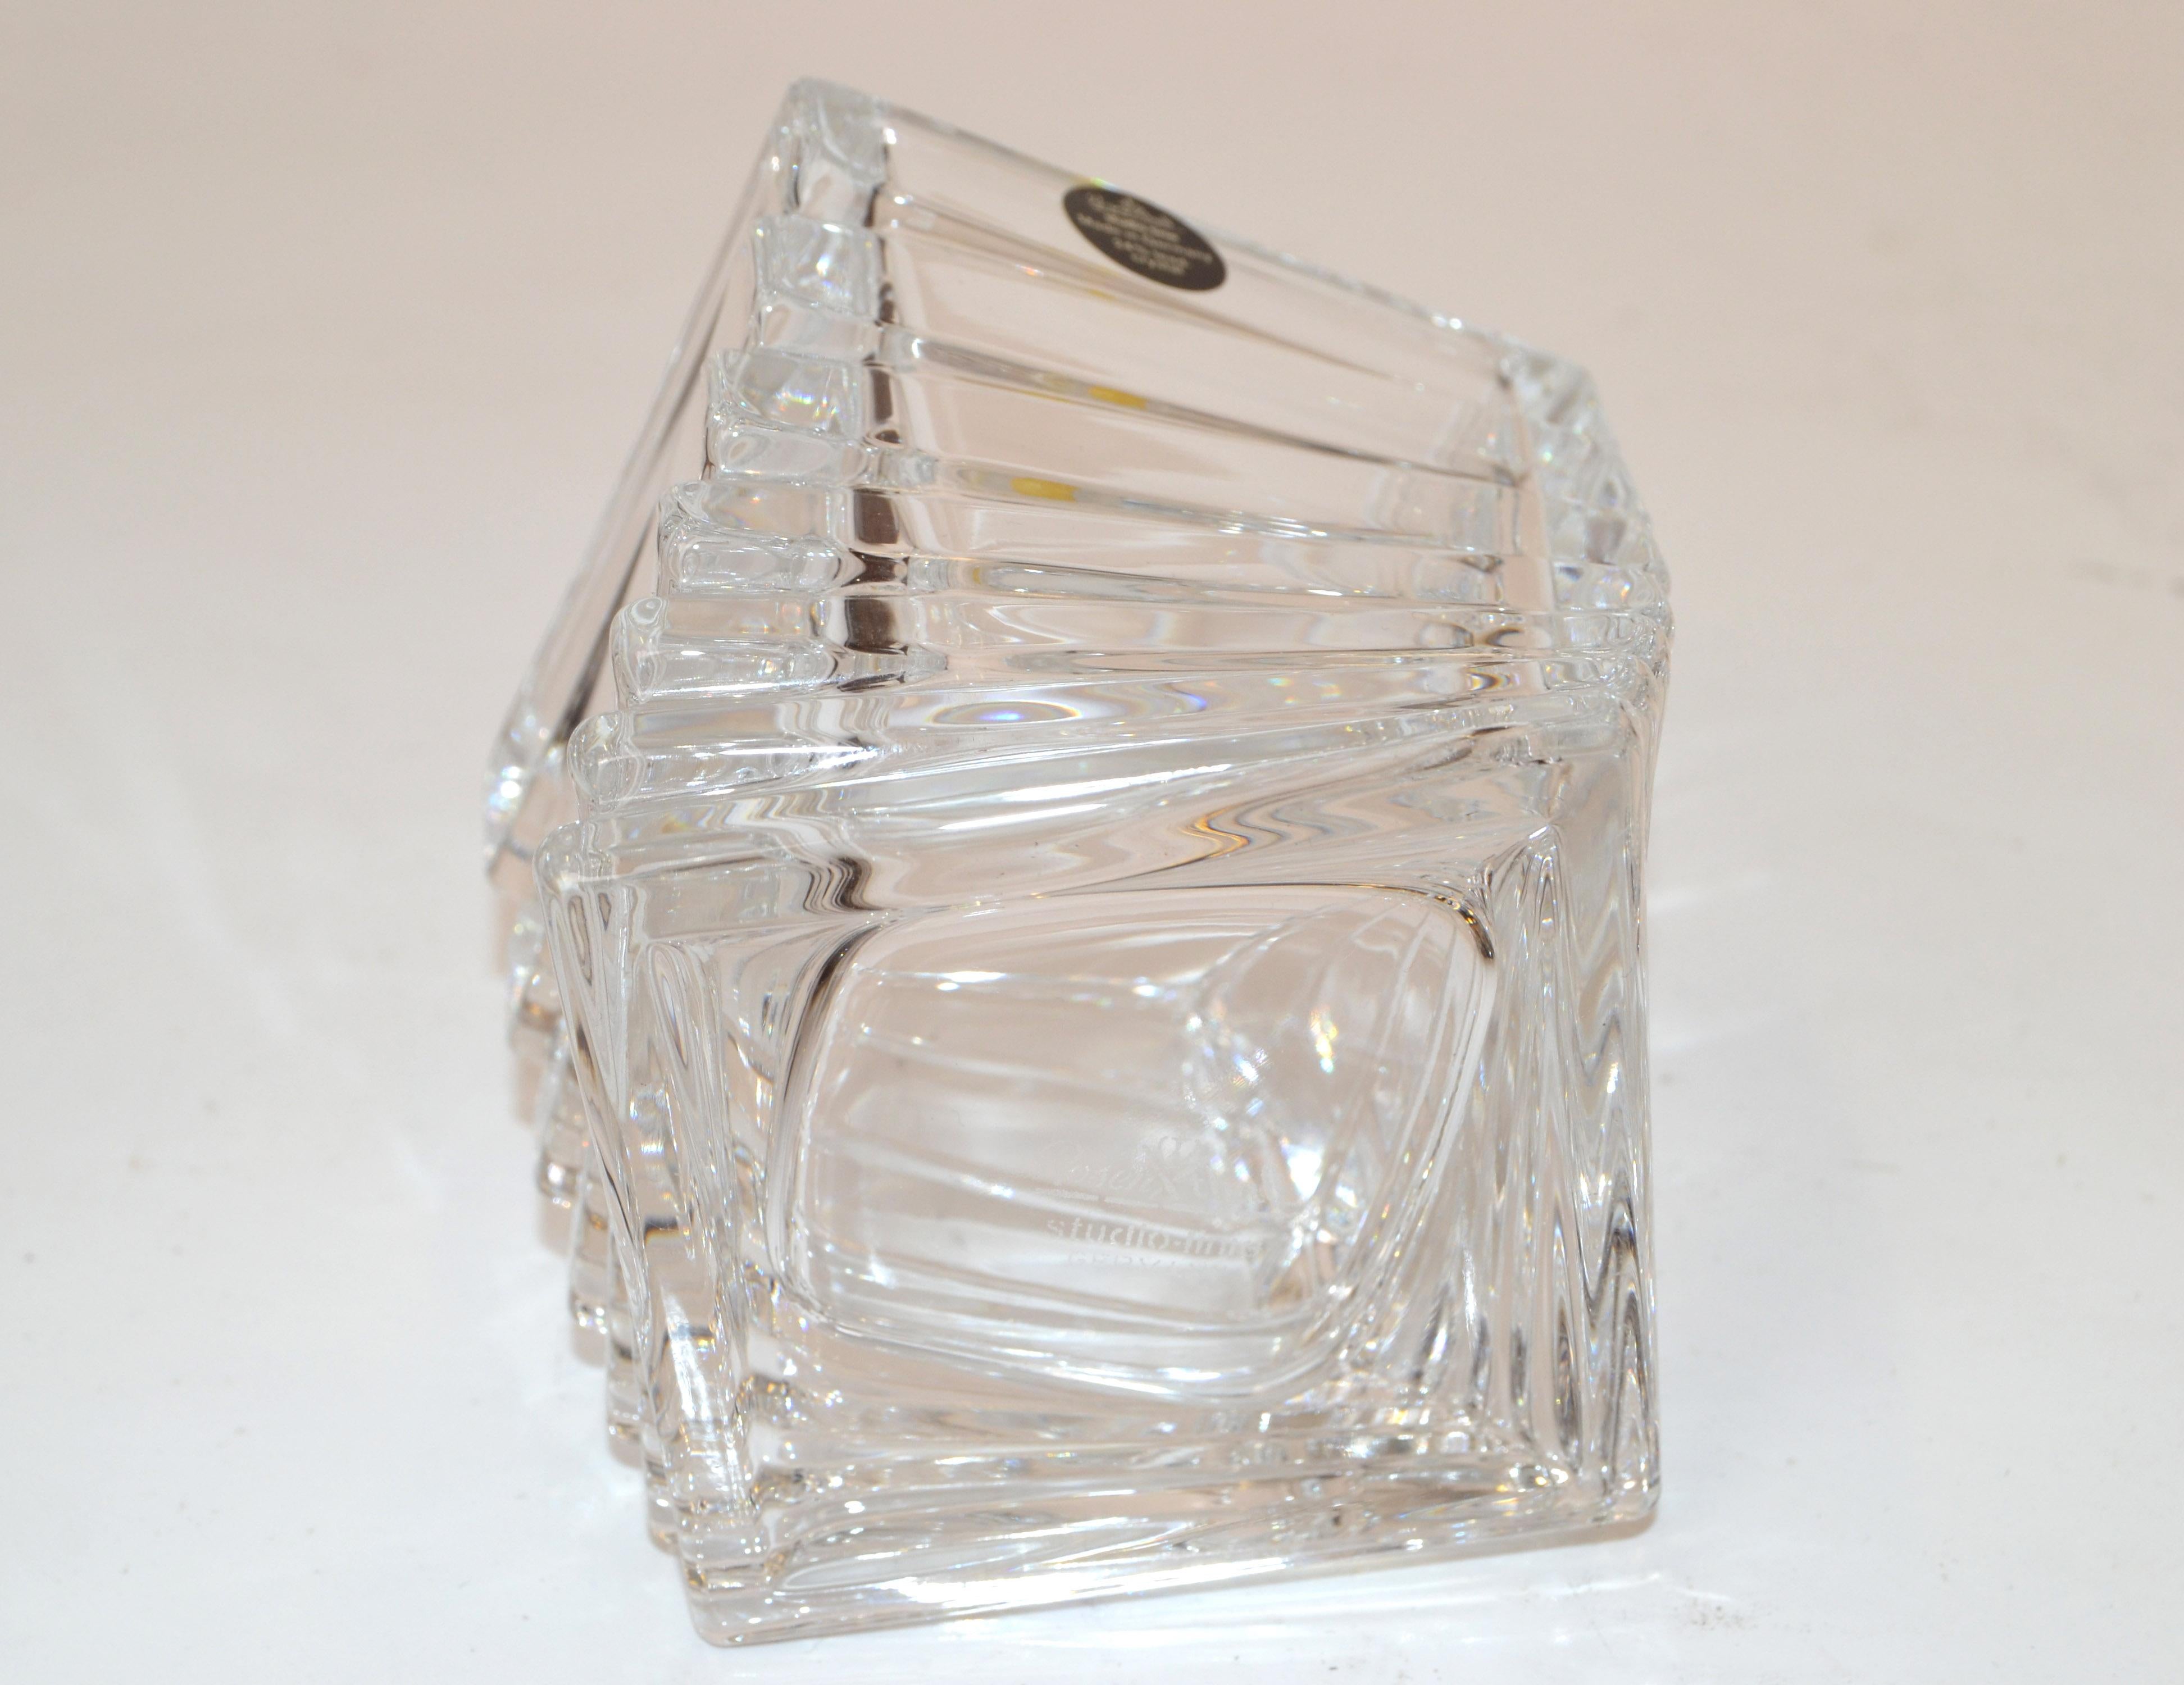 Classic Rosenthal Turnus 24 % Lead Crystal Glass Vase Vessel Studio Line Germany In Good Condition For Sale In Miami, FL